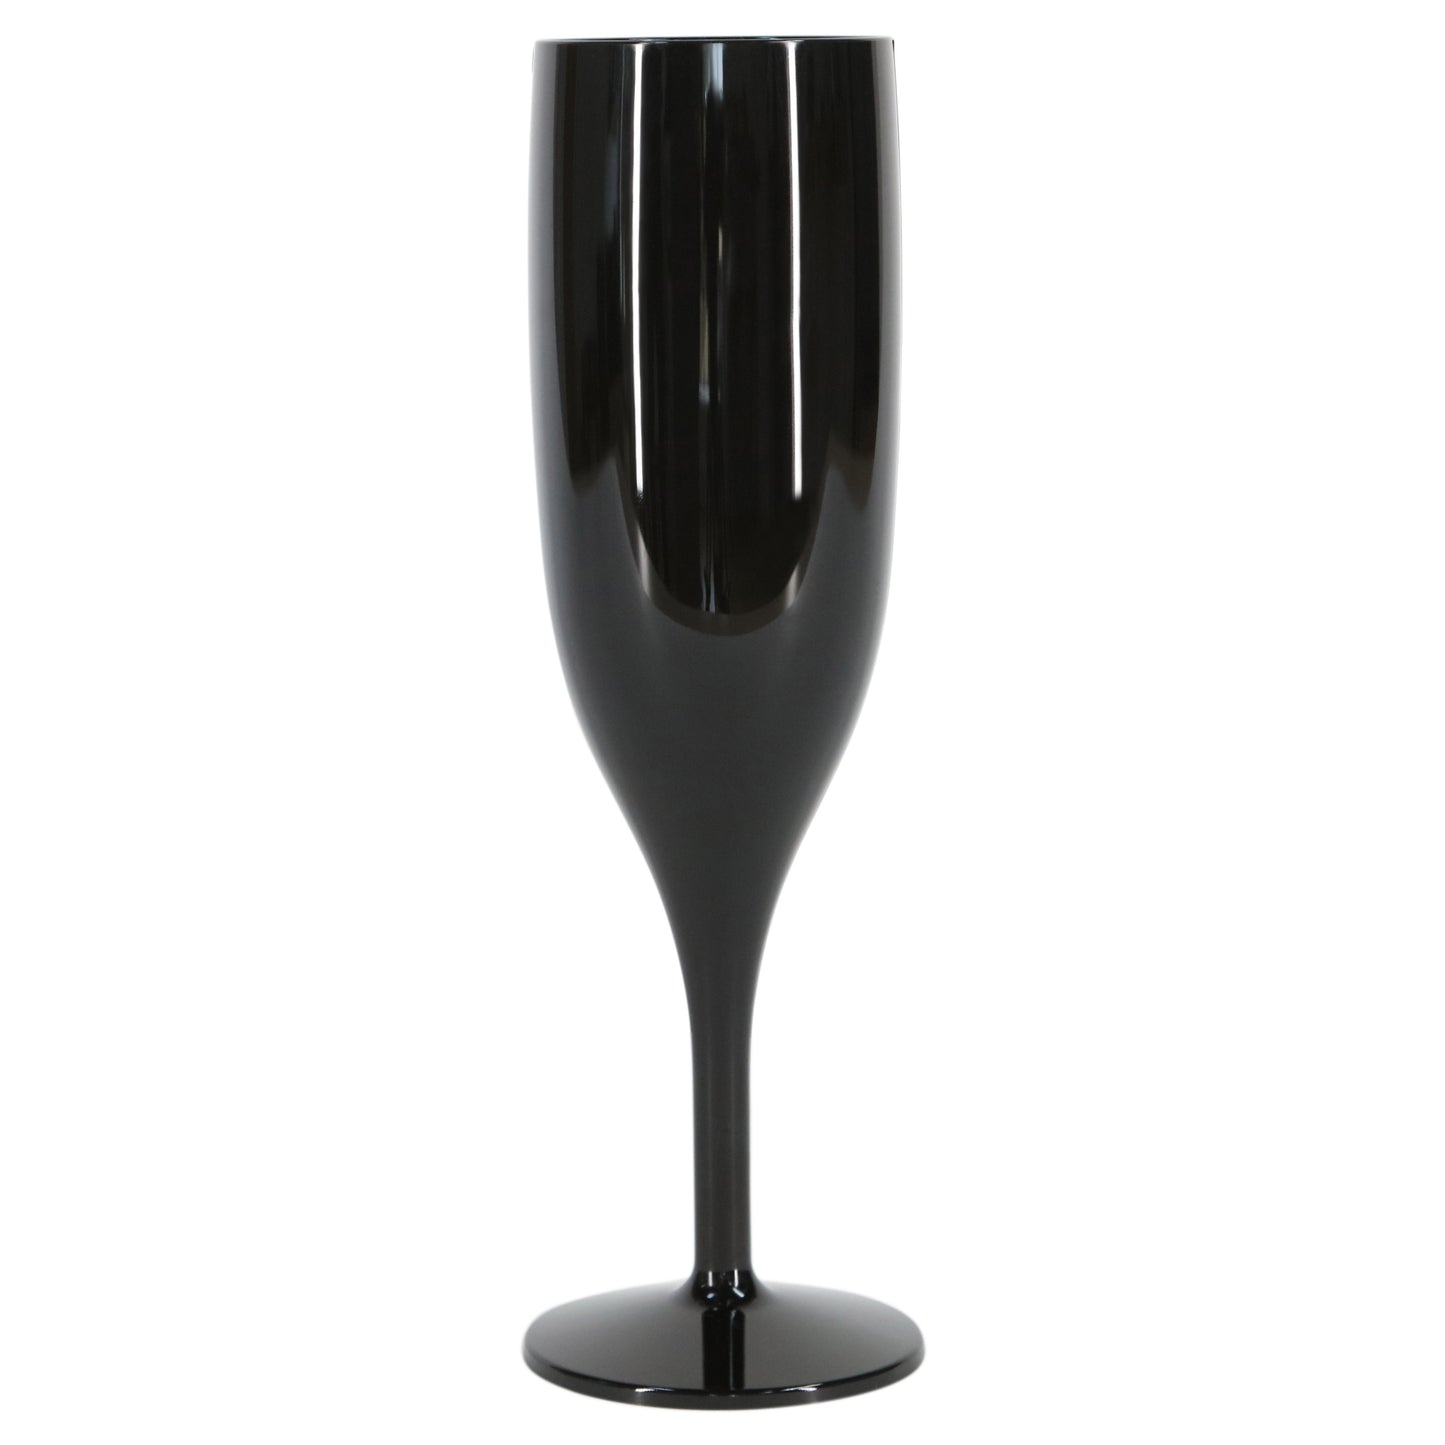 48 x Black Prosecco Flutes – Made from Strong Reusable Plastic 1-Piece Champagne Glass (Pack of 48 Glasses) Halloween, Parties, Hot Tub-5056020186847-EY-PP-122-Product Pro-Baby Shower, Black Champagne Flutes, Black Champagne Glasses, Black Flutes, Black Prosecco Flutes, Black Prosecco Glasses, Bridal Shower, Halloween, Hen Do, Reusable Flutes